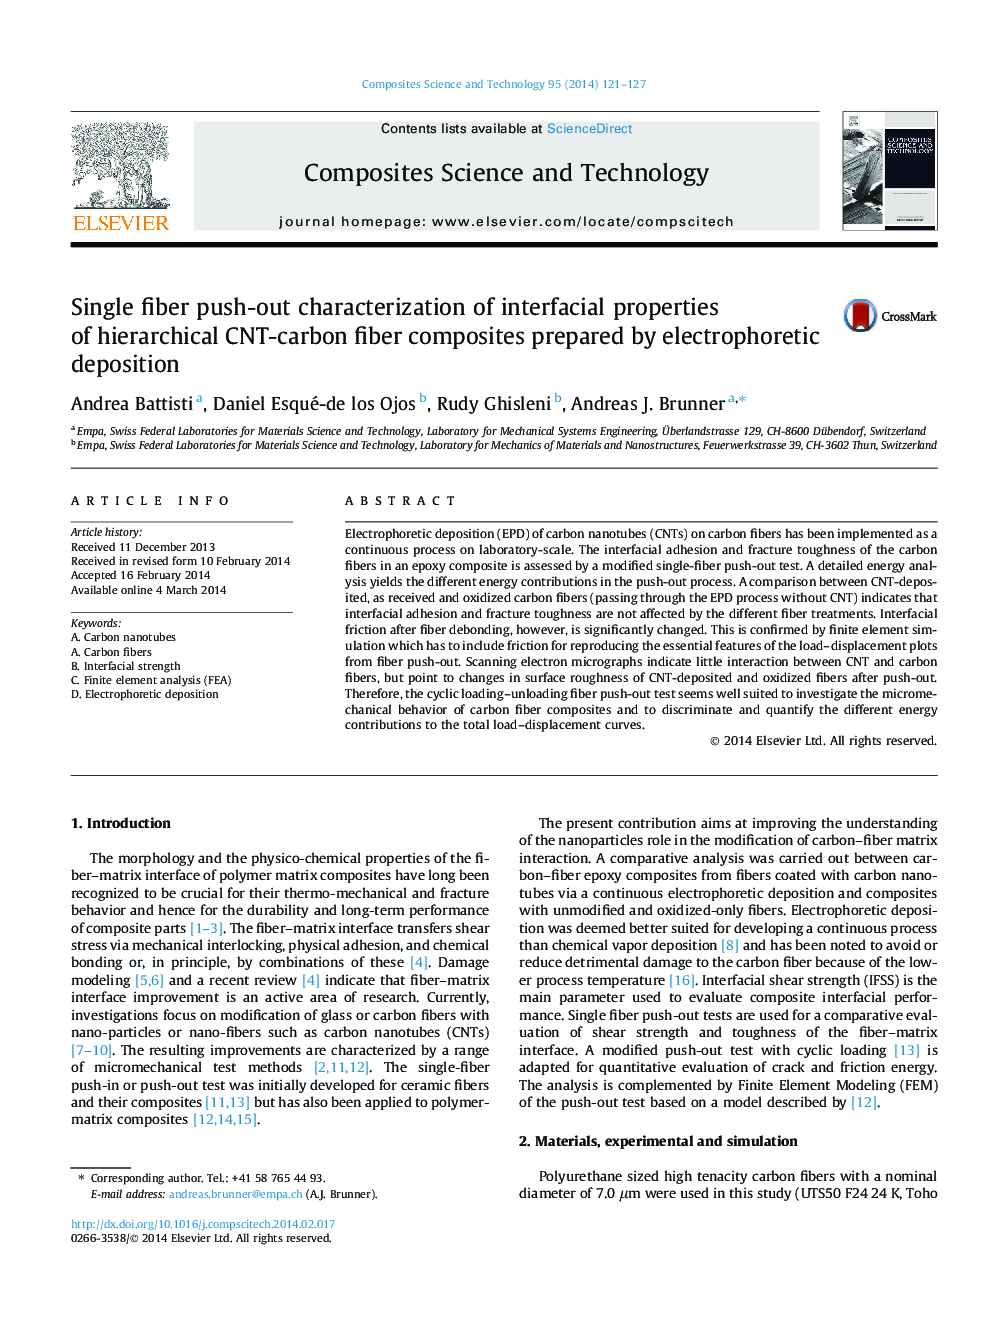 Single fiber push-out characterization of interfacial properties of hierarchical CNT-carbon fiber composites prepared by electrophoretic deposition